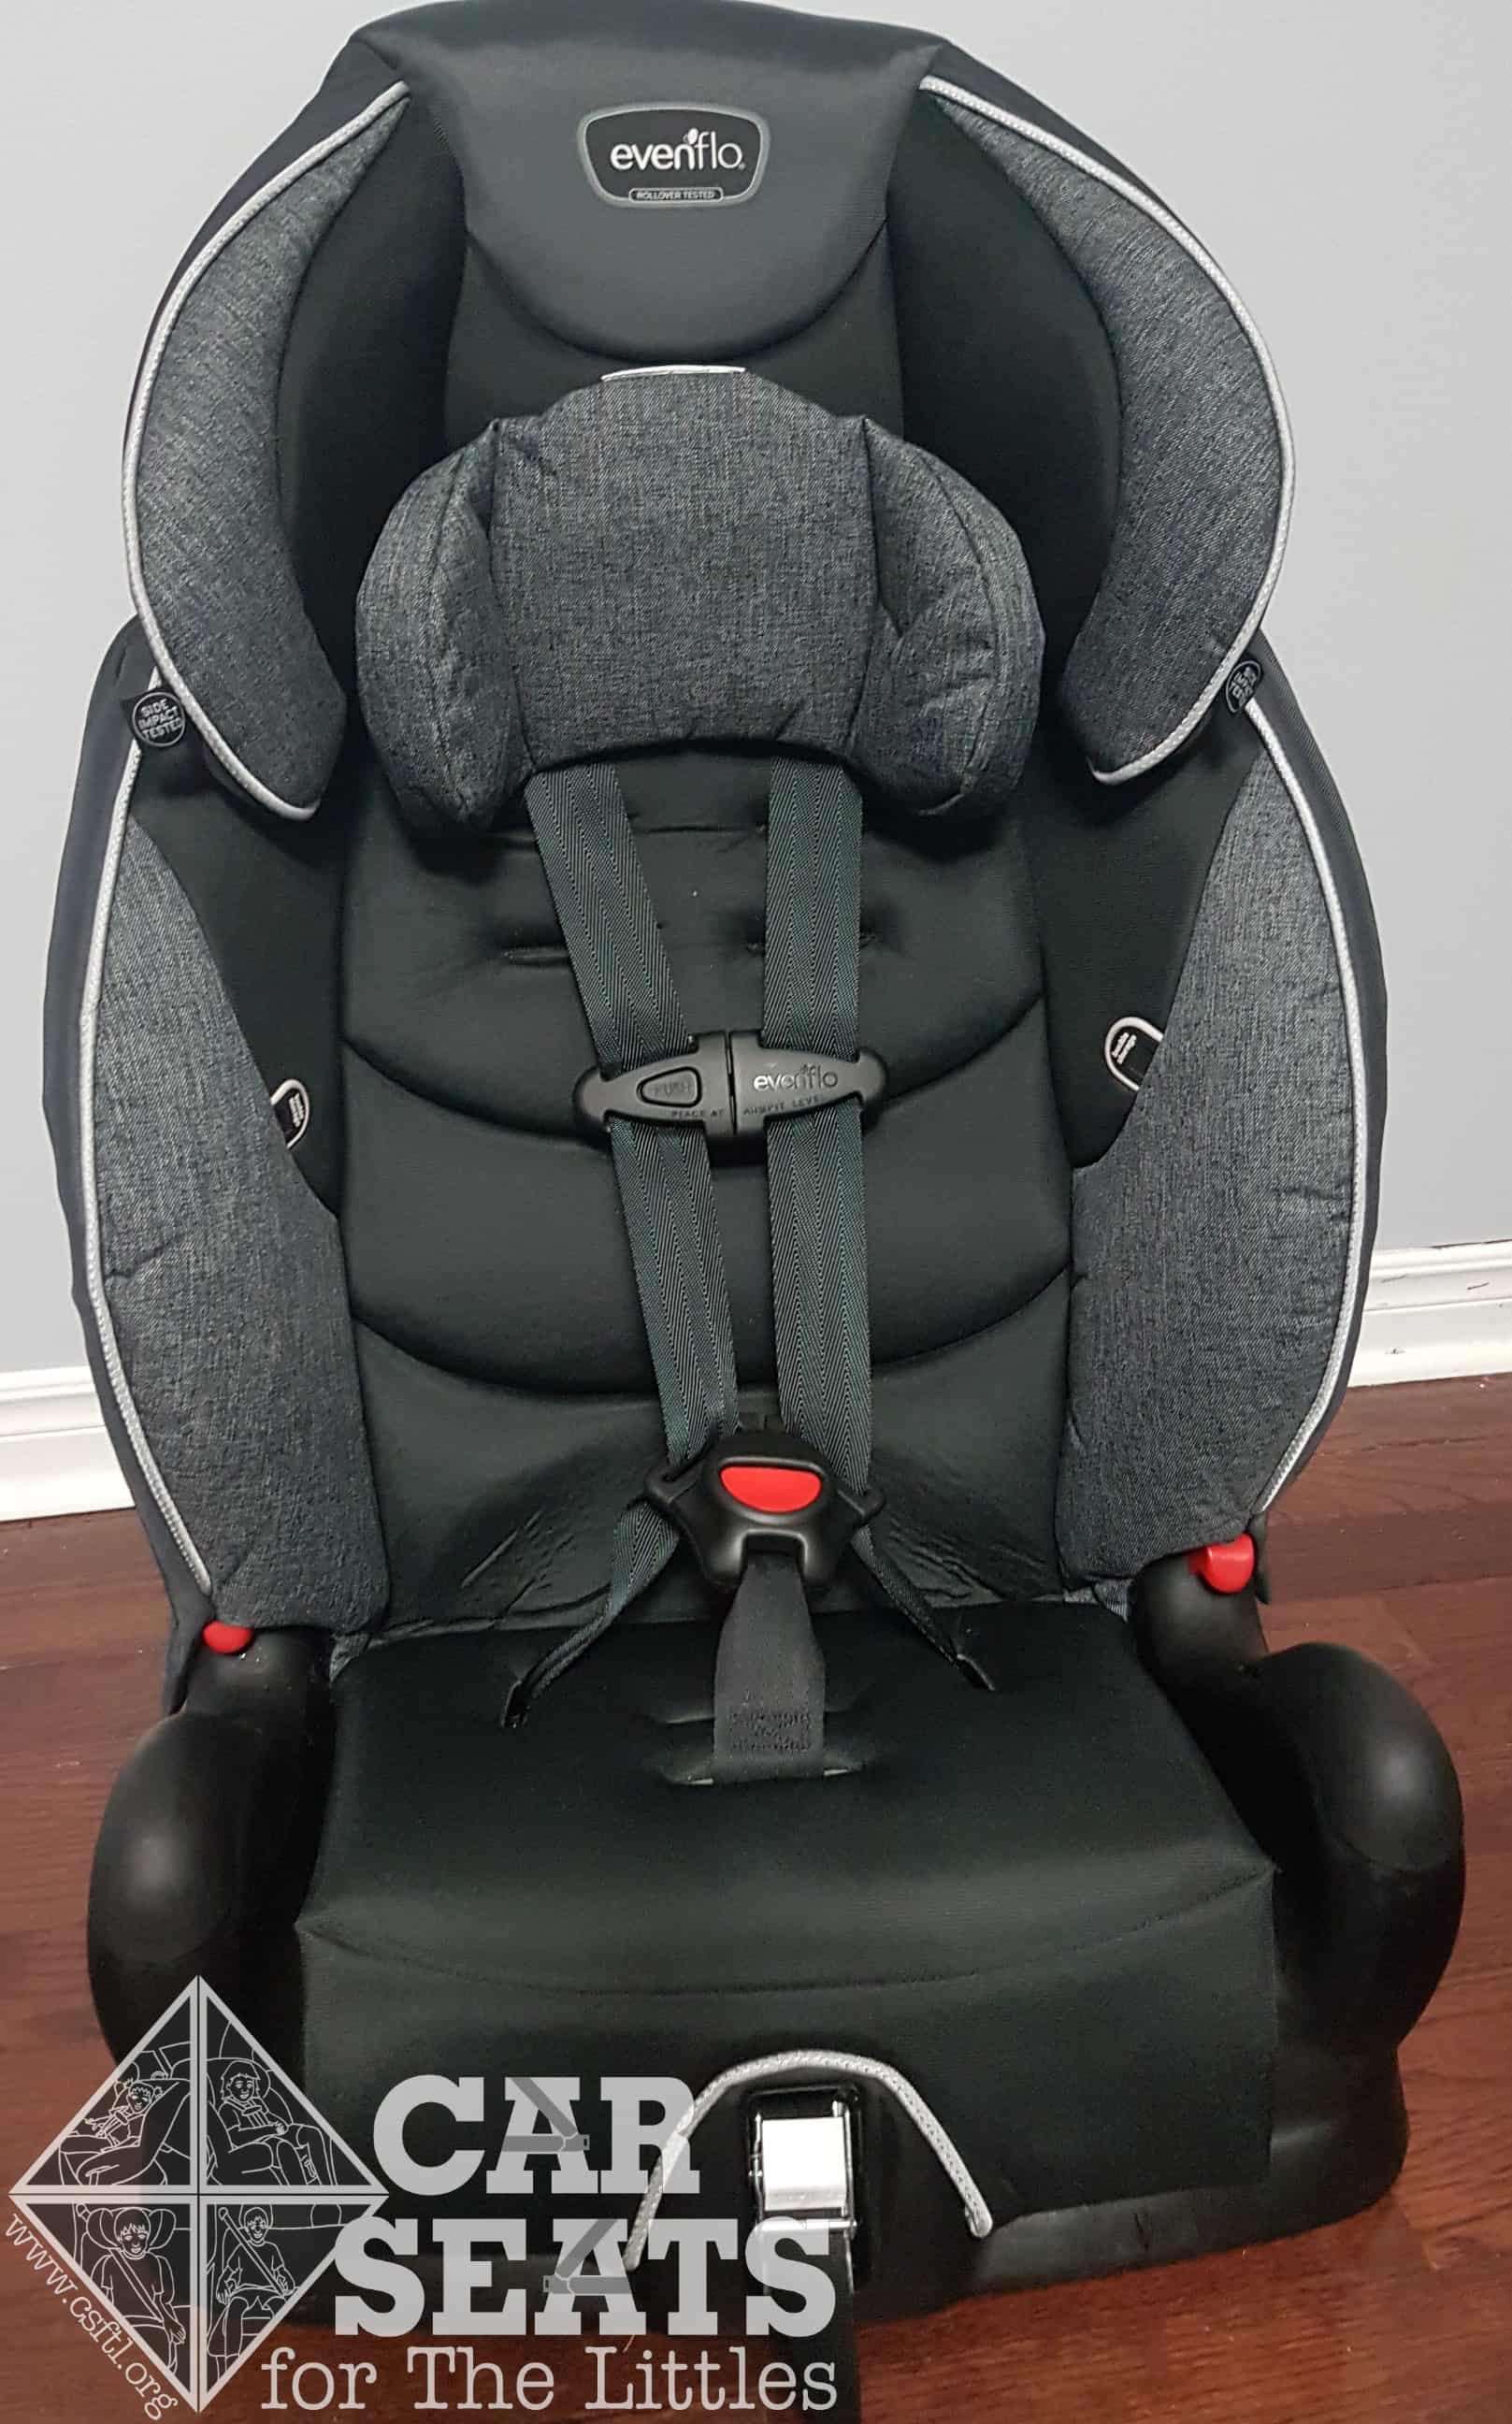 Evenflo Maestro Combination Car Seat Review Car Seats For The Littles